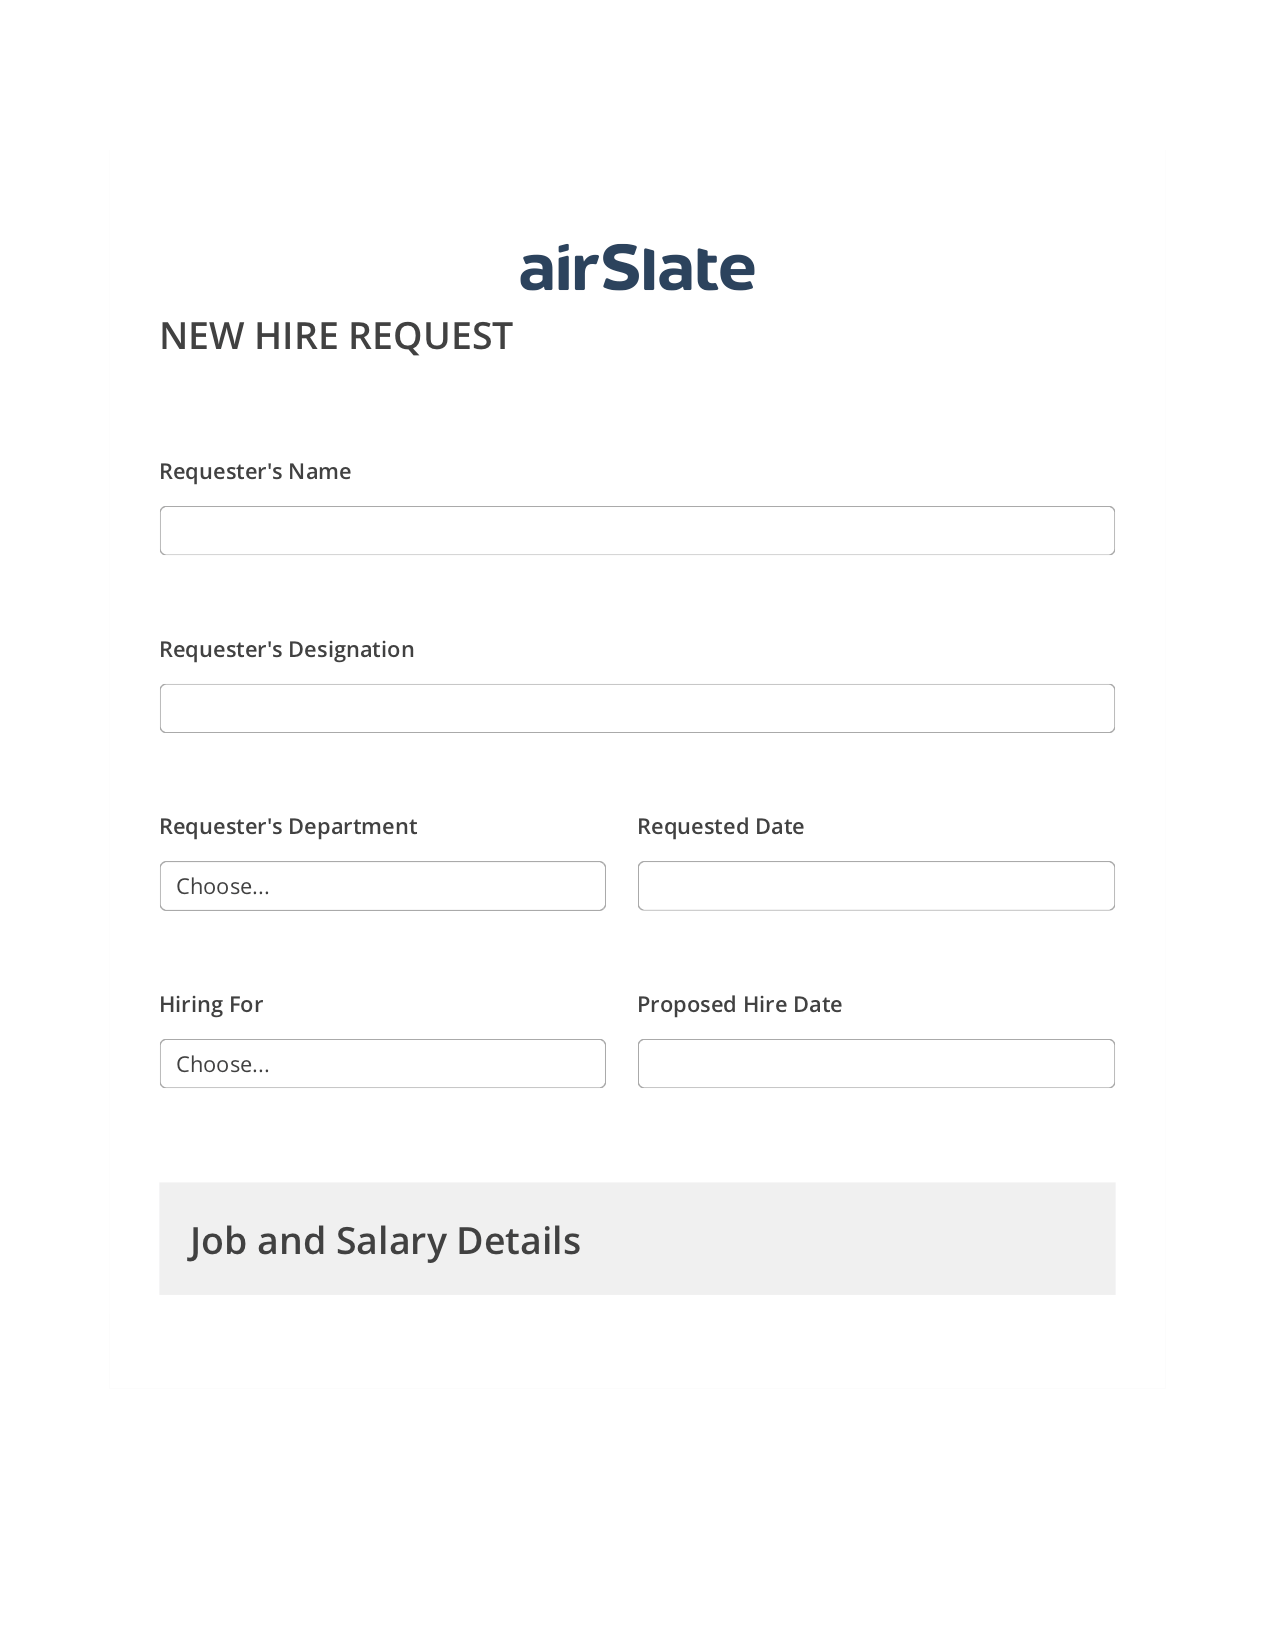 Hiring Request Workflow Pre-fill from another Slate Bot, Google Calendar Bot, Archive to SharePoint Folder Bot